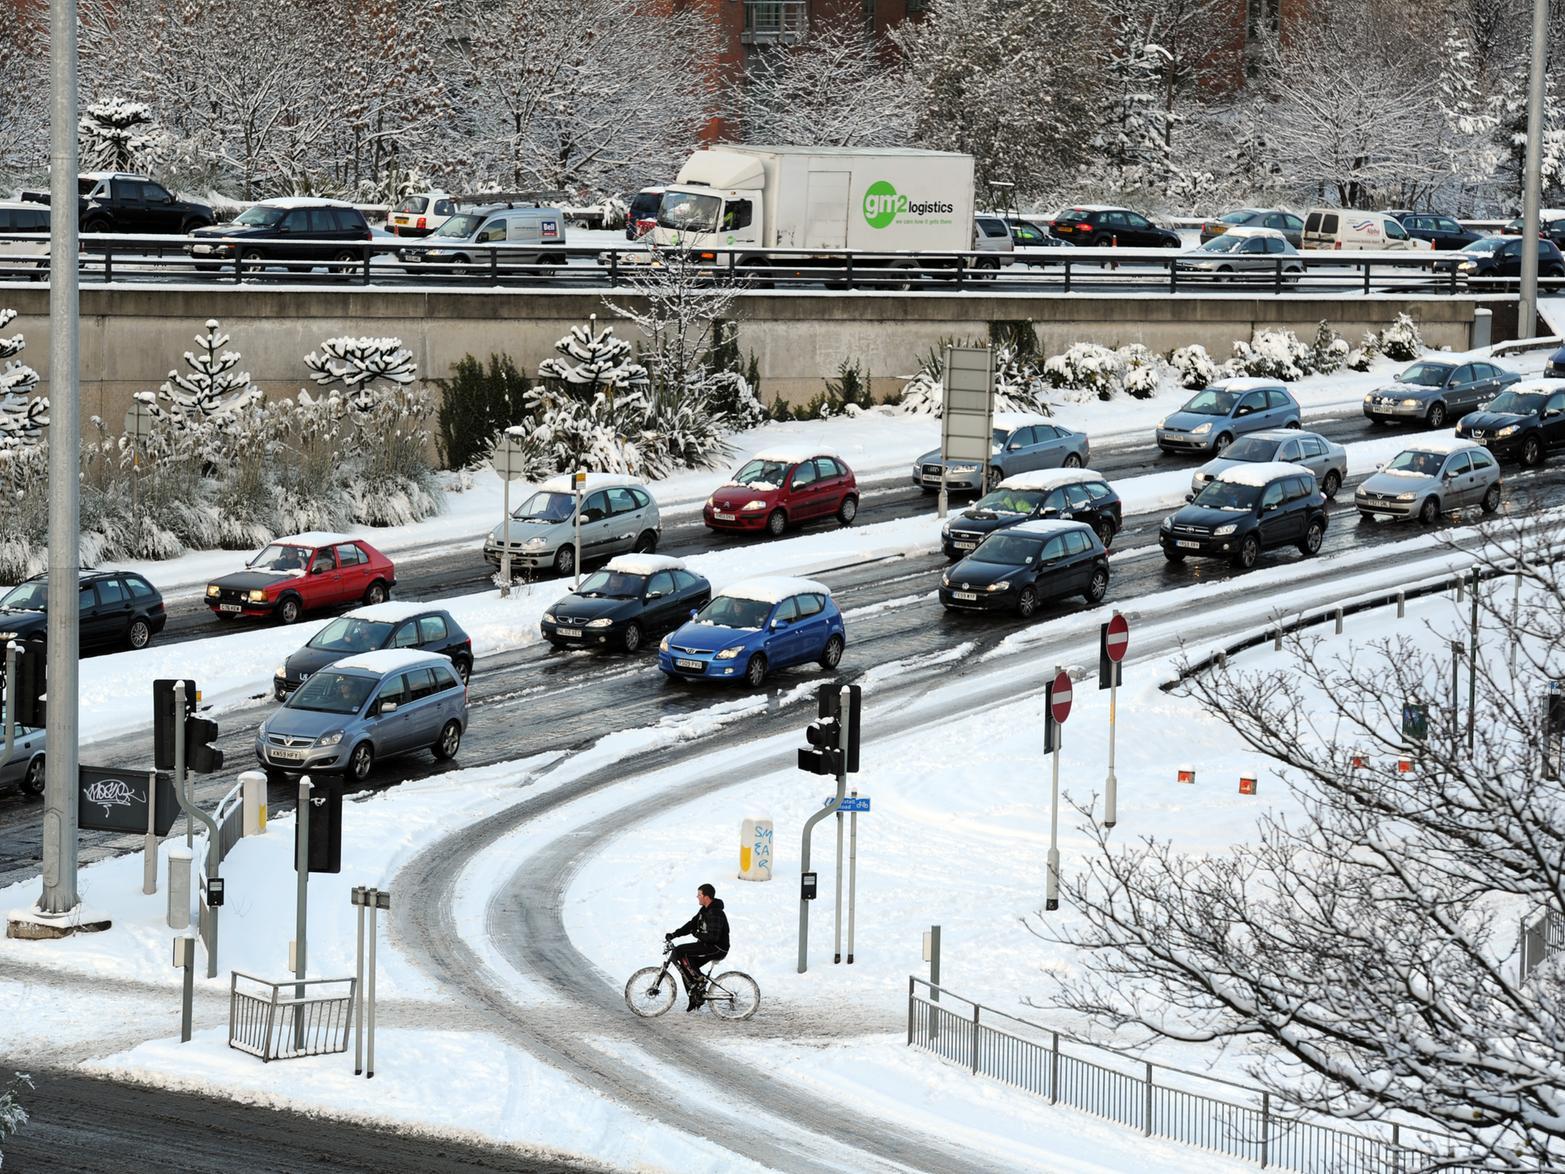 The snow brought gridlock to traffic on the Leeds Inner Ring Road.